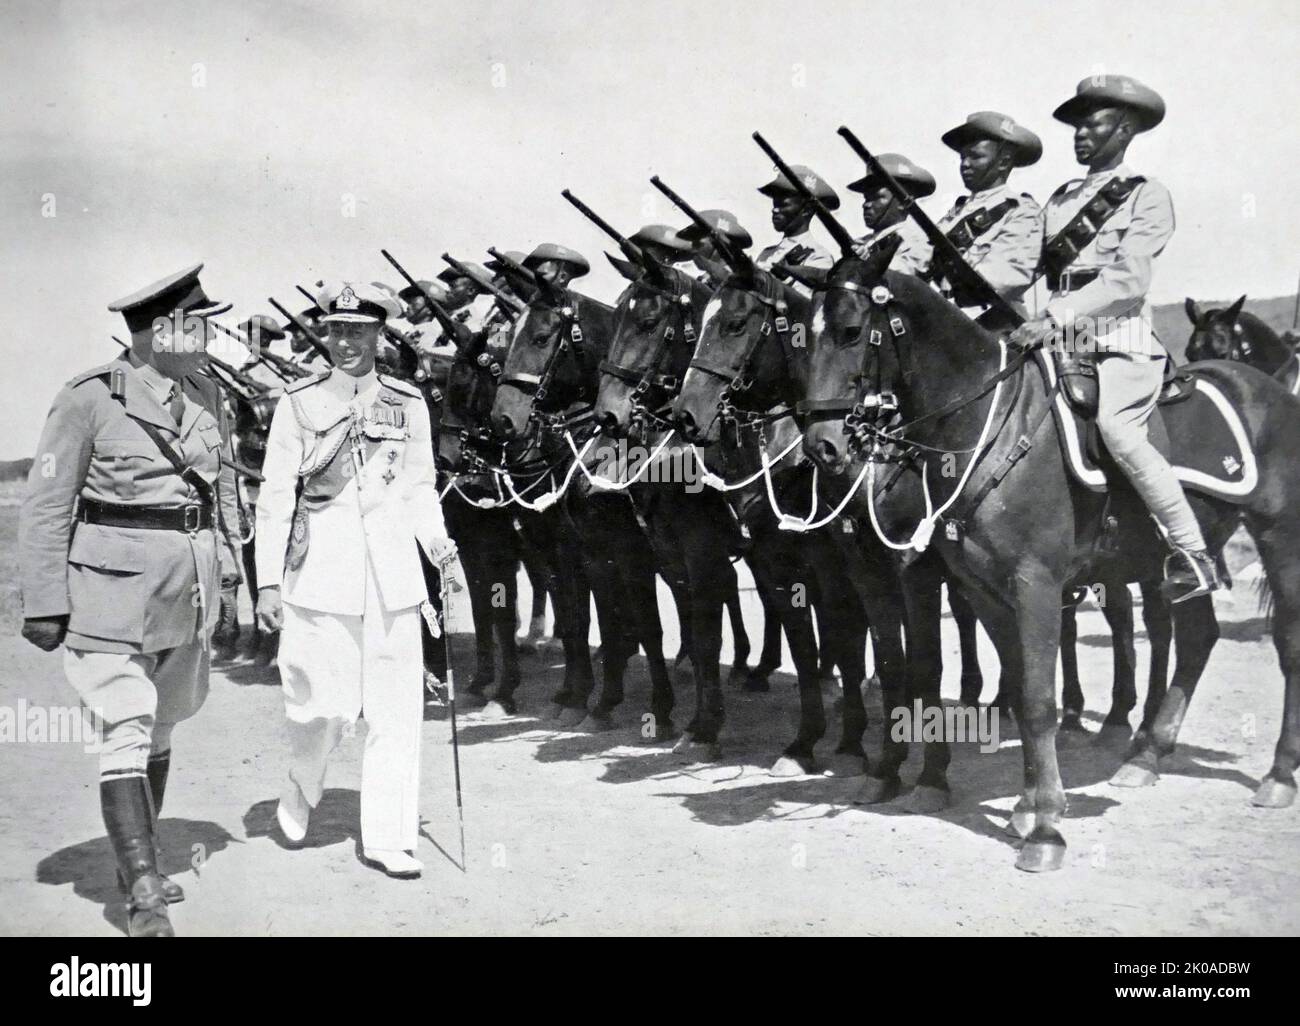 King George VI of Great Britain visits Bechuanaland (Botswana) in Southern Africa, 1947 Stock Photo